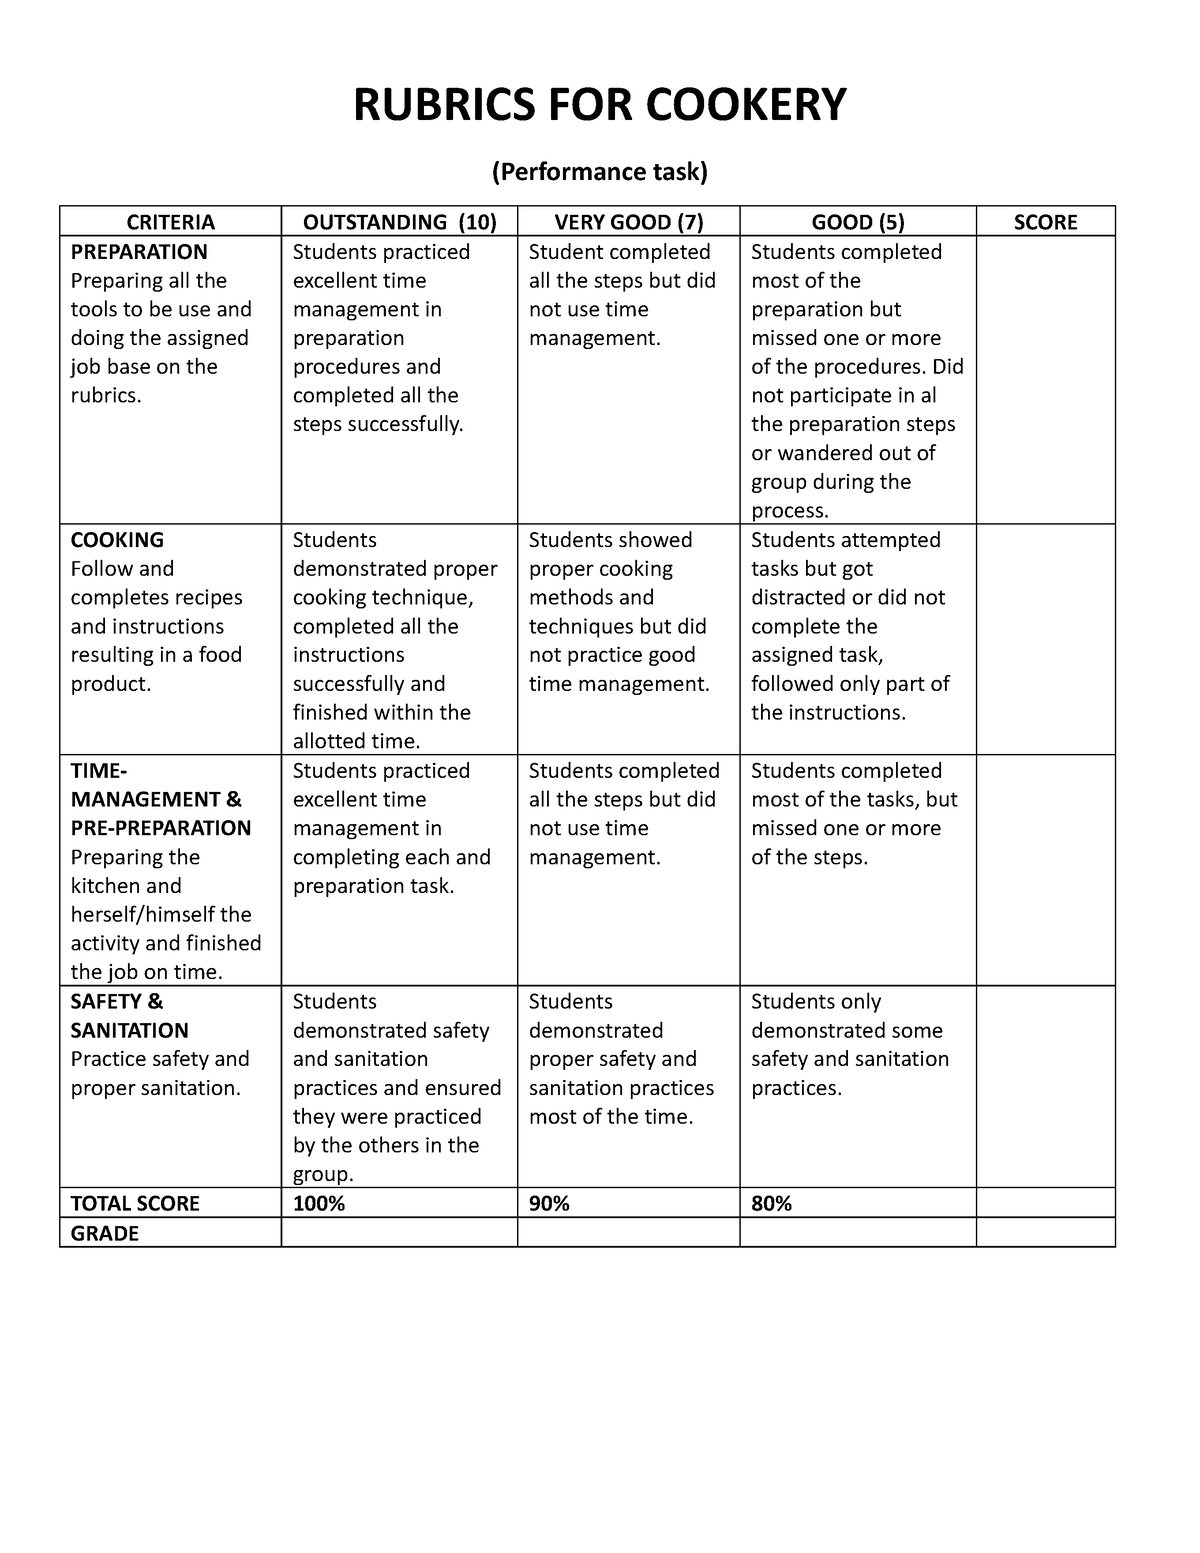 Rubrics For Cookery Rubrics For Cookery Performance Task Criteria Outstanding 10 Very Good 3228